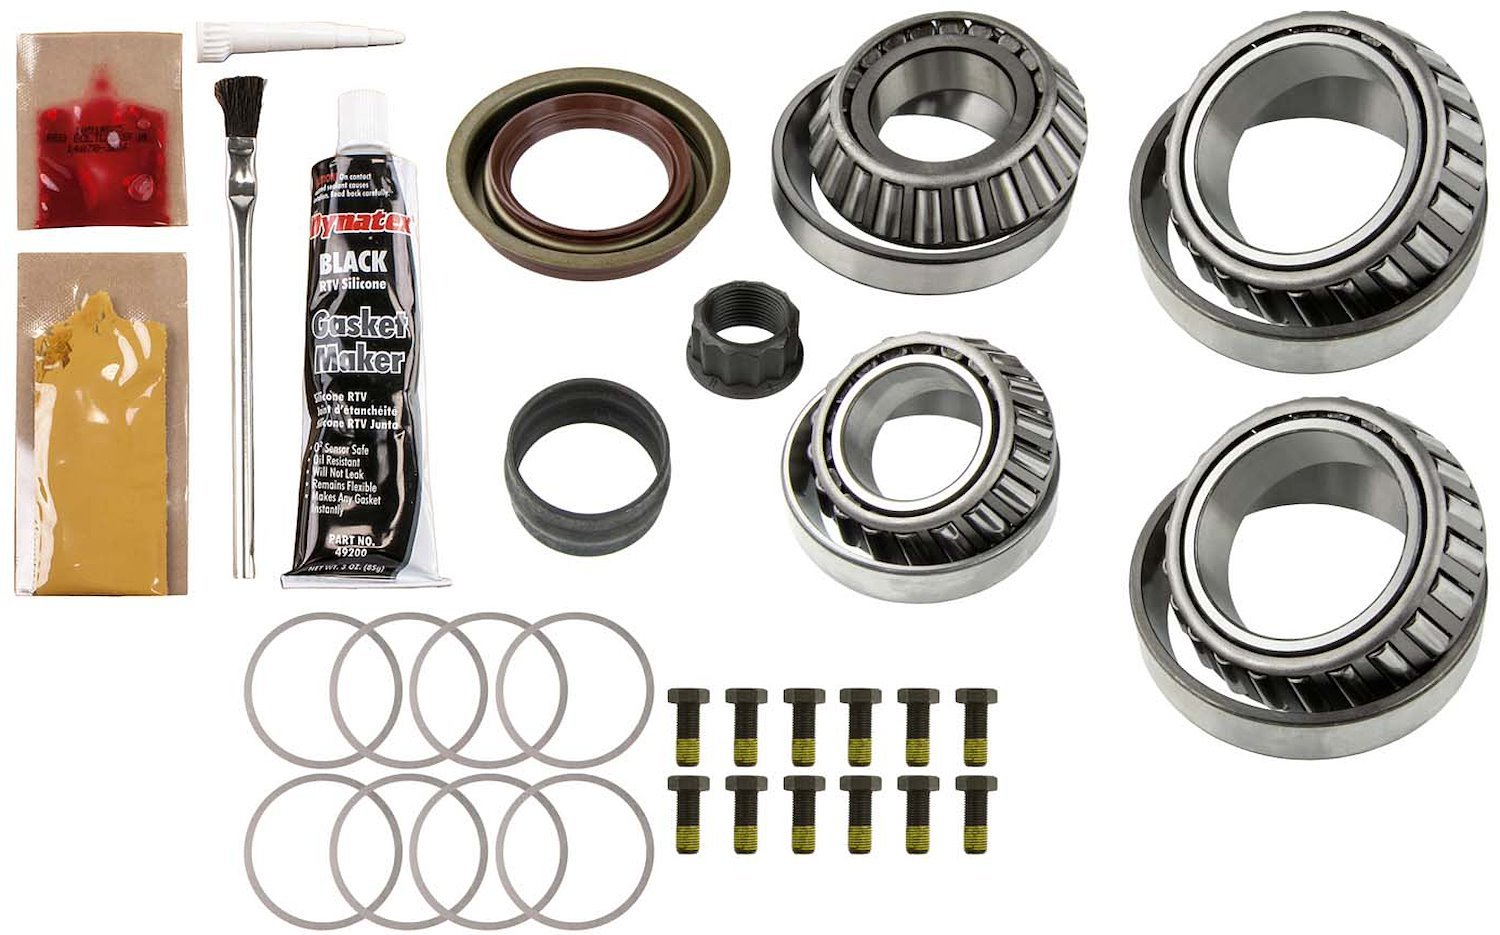 Differential Master Bearing Kit AAM 11.5 in.14-bolt - Timken Bearings